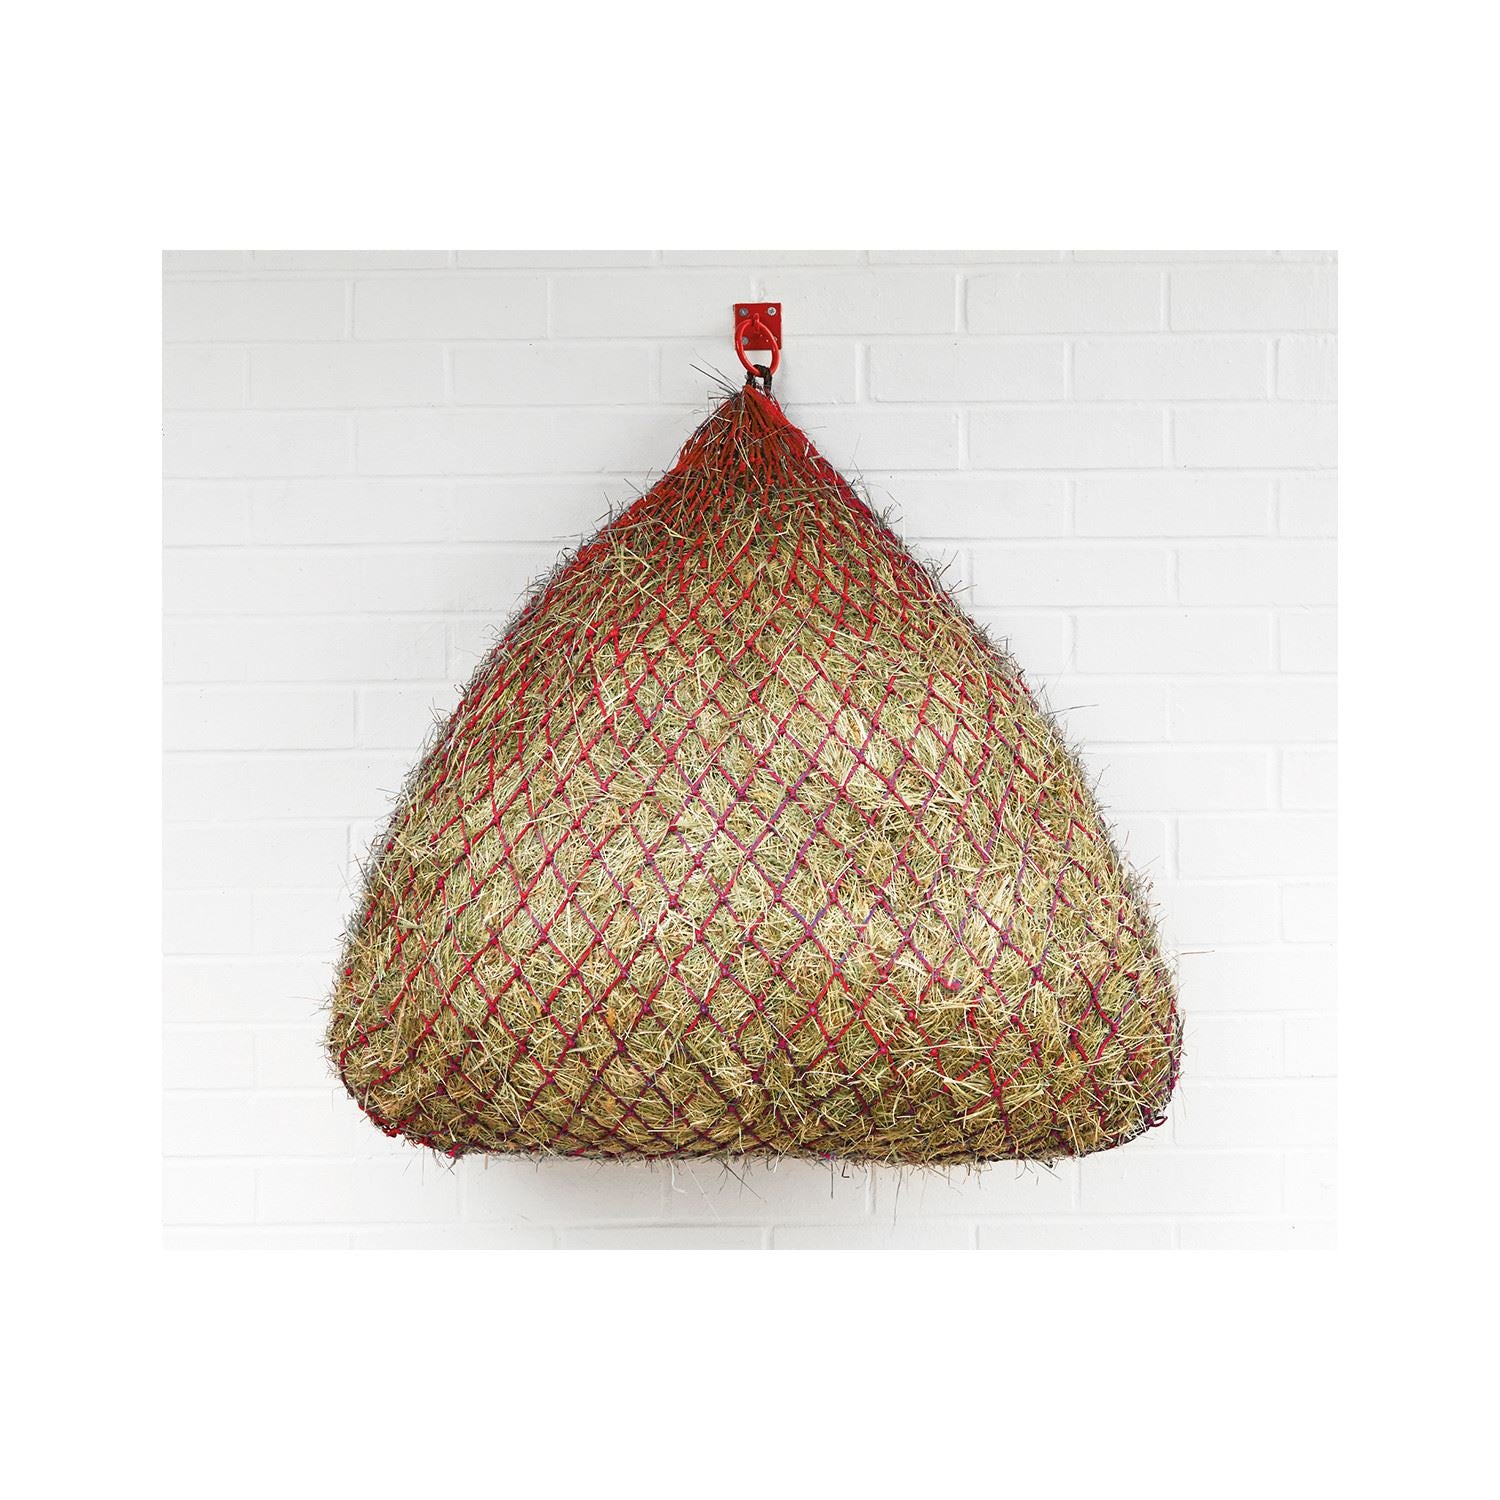 Perry Equestrian 50 Square Bottom Slow Feeder Polypropylene Hay/Haylage Net - Large 9.5Kg capacity" - Just Horse Riders